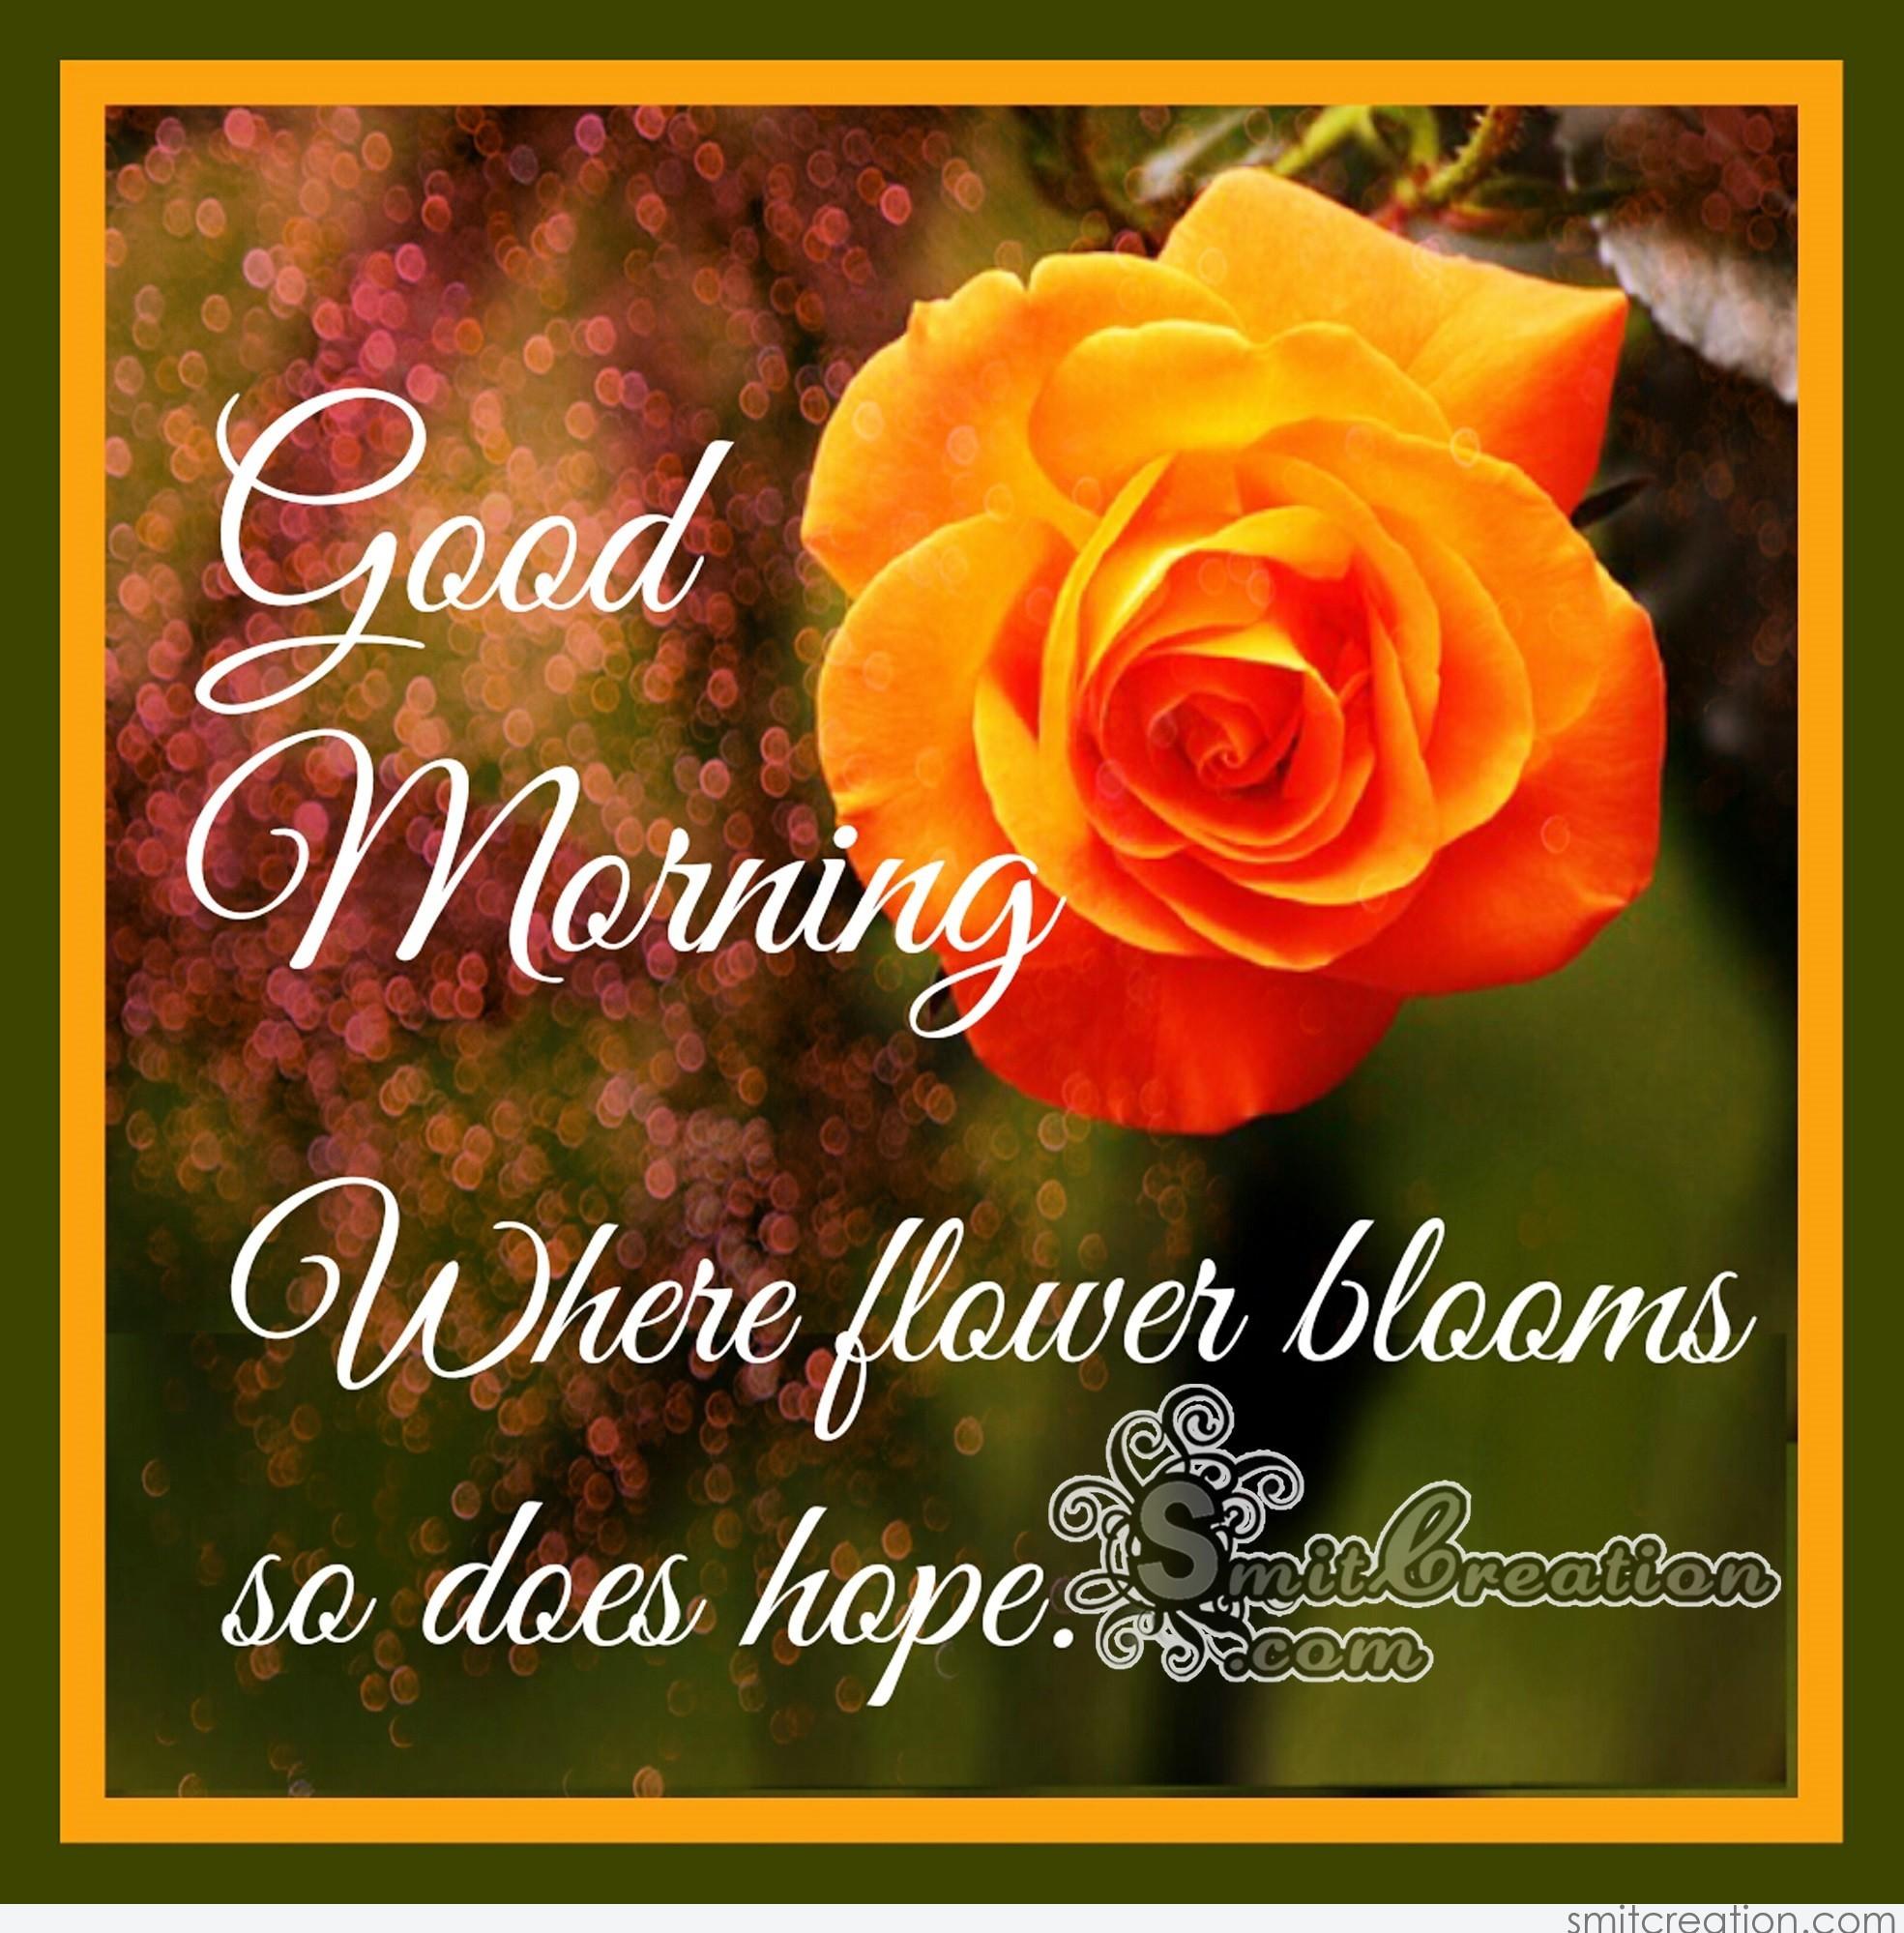 Good morning images with rose flowers good morning photos with rose  flowers  Good morning wallpaper with rose flowers